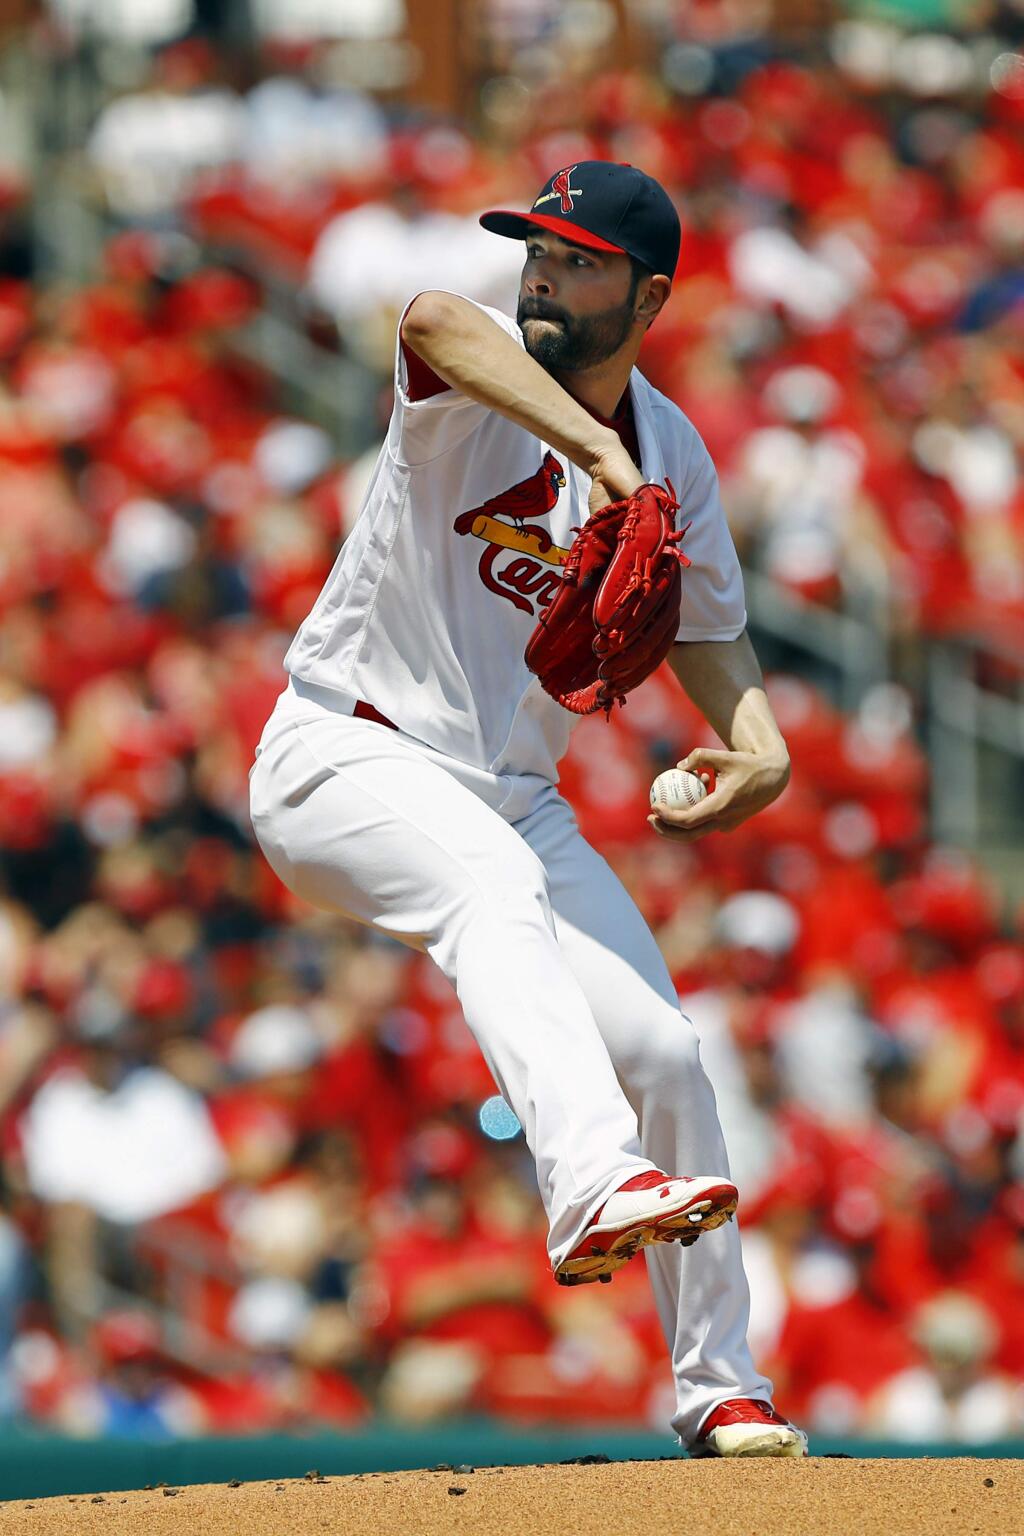 St. Louis Cardinals starting pitcher Jaime Garcia throws during the first inning of a baseball game against the Oakland Athletics, Sunday, Aug. 28, 2016, in St. Louis. (AP Photo/Billy Hurst)